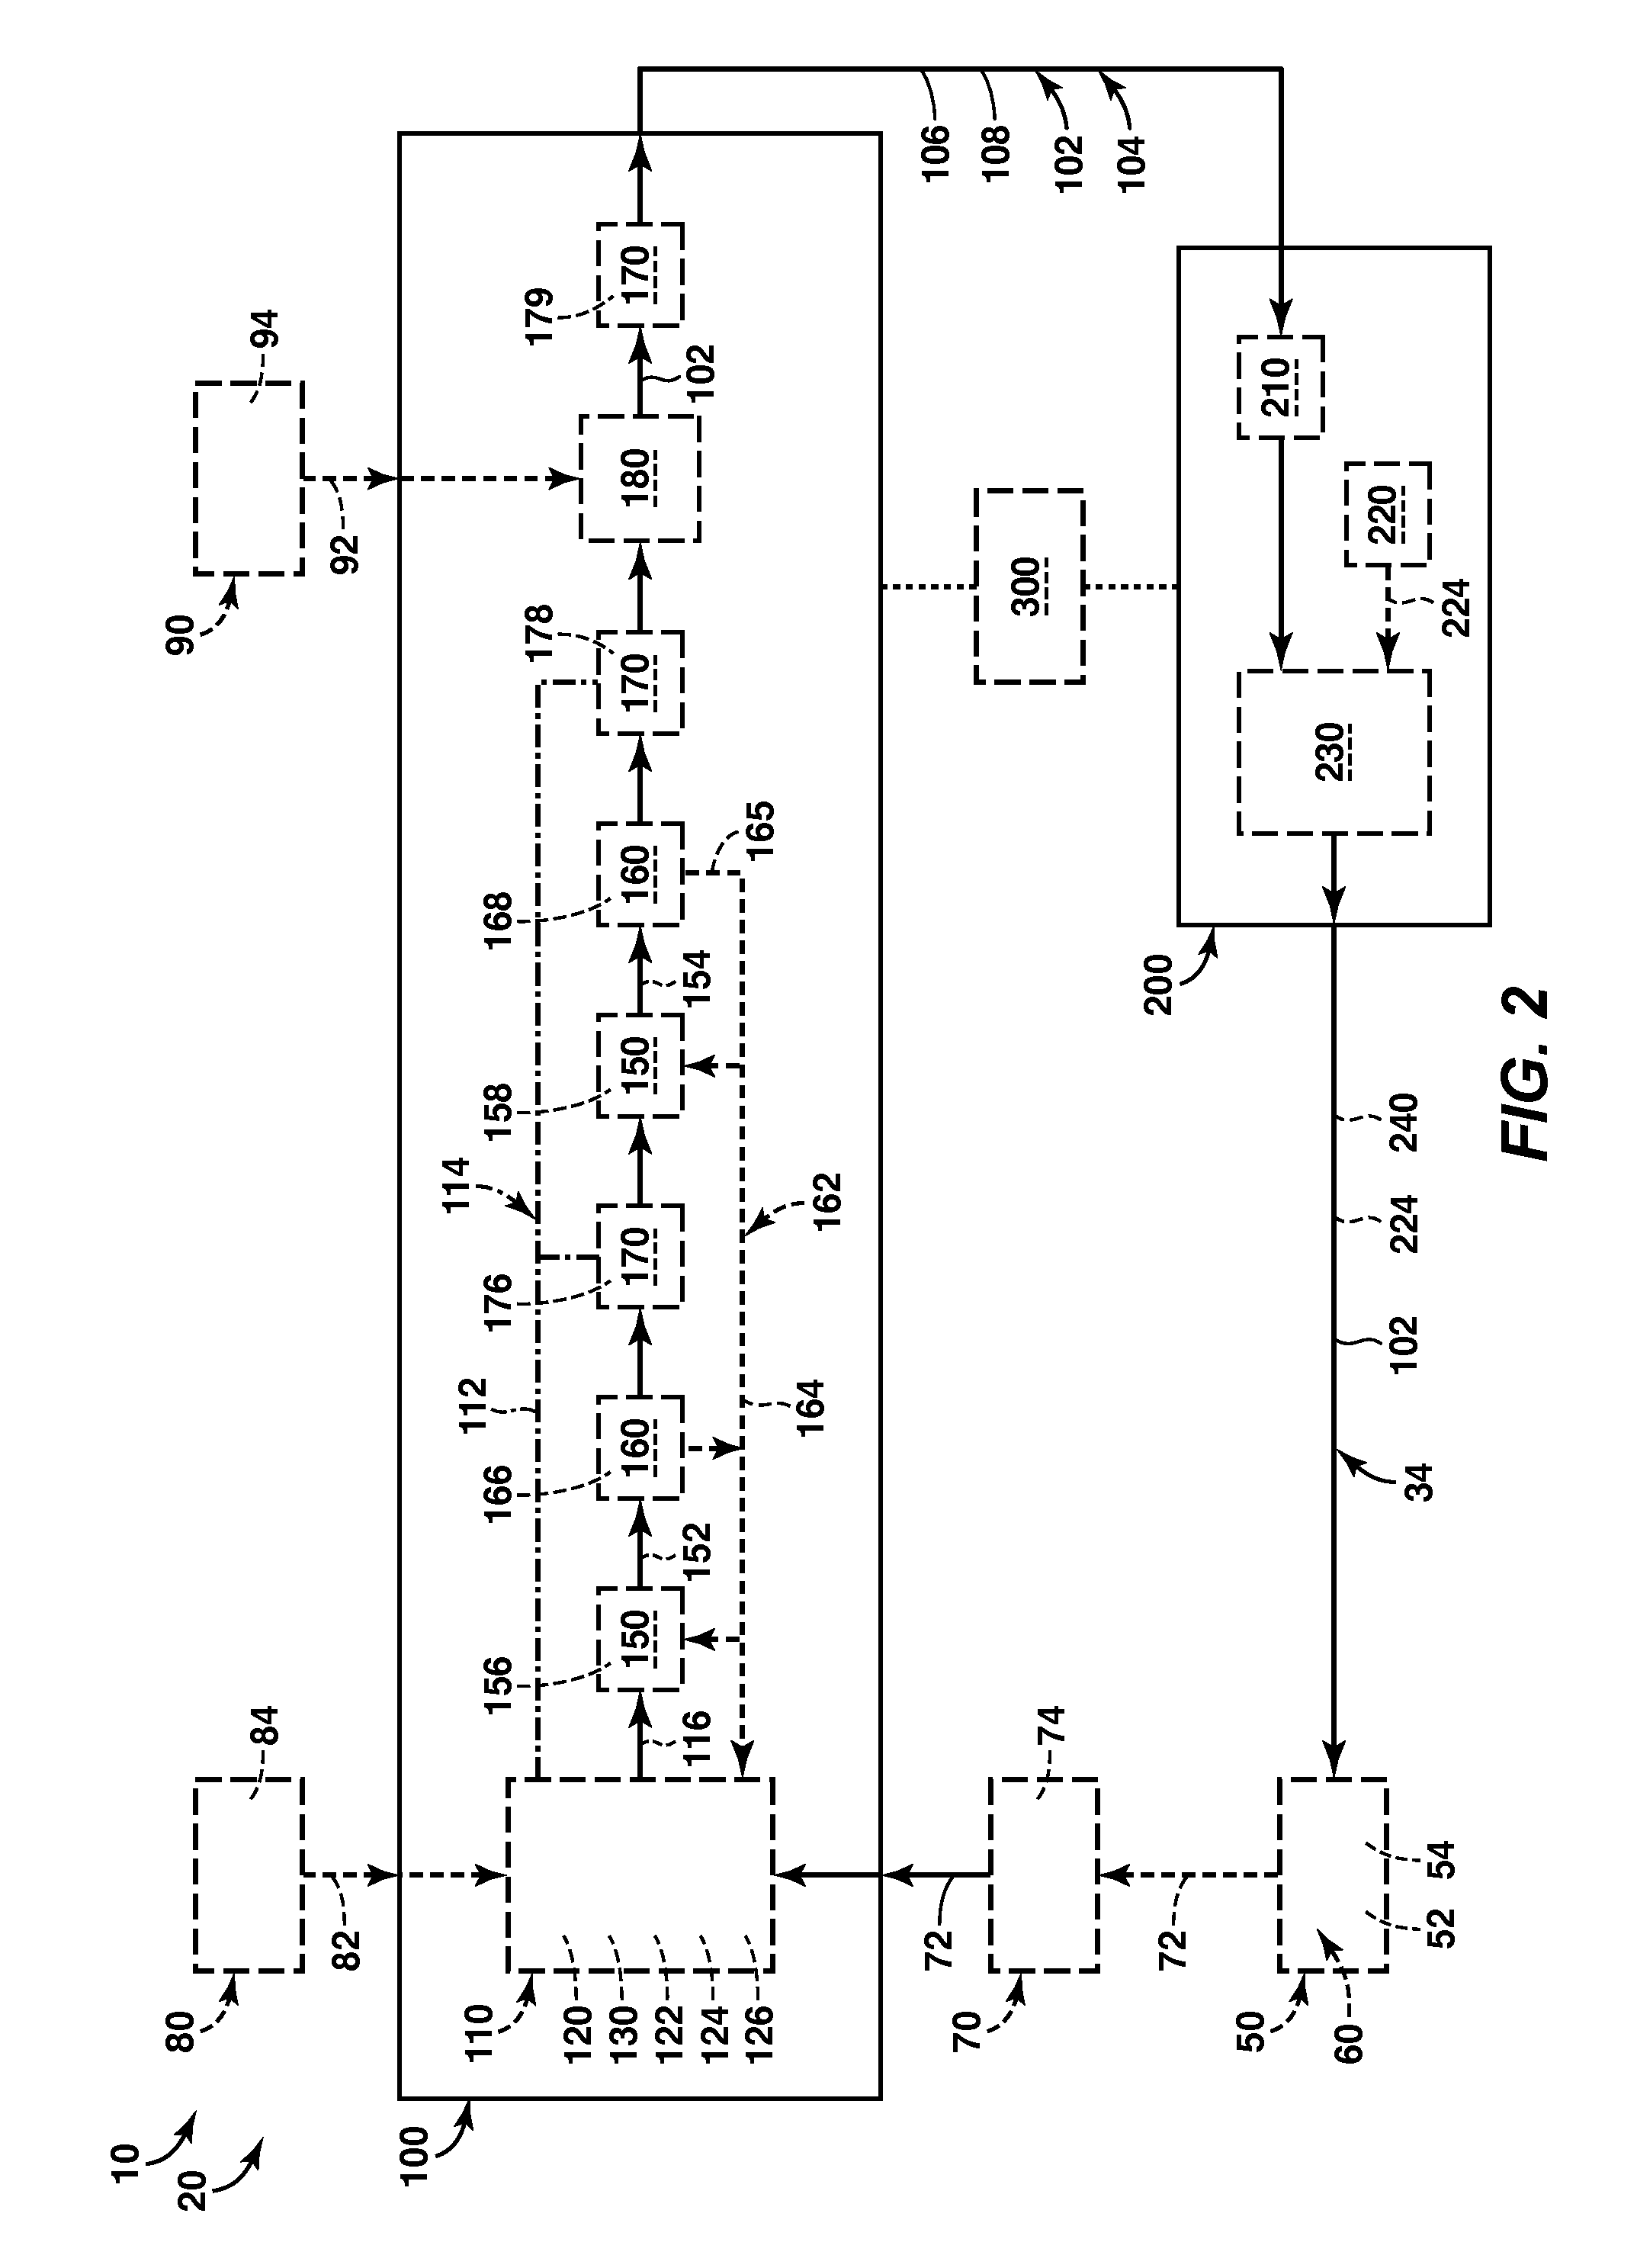 On-Site Generation of a Fracturing Fluid Stream and Systems and Methods Utilizing the Same